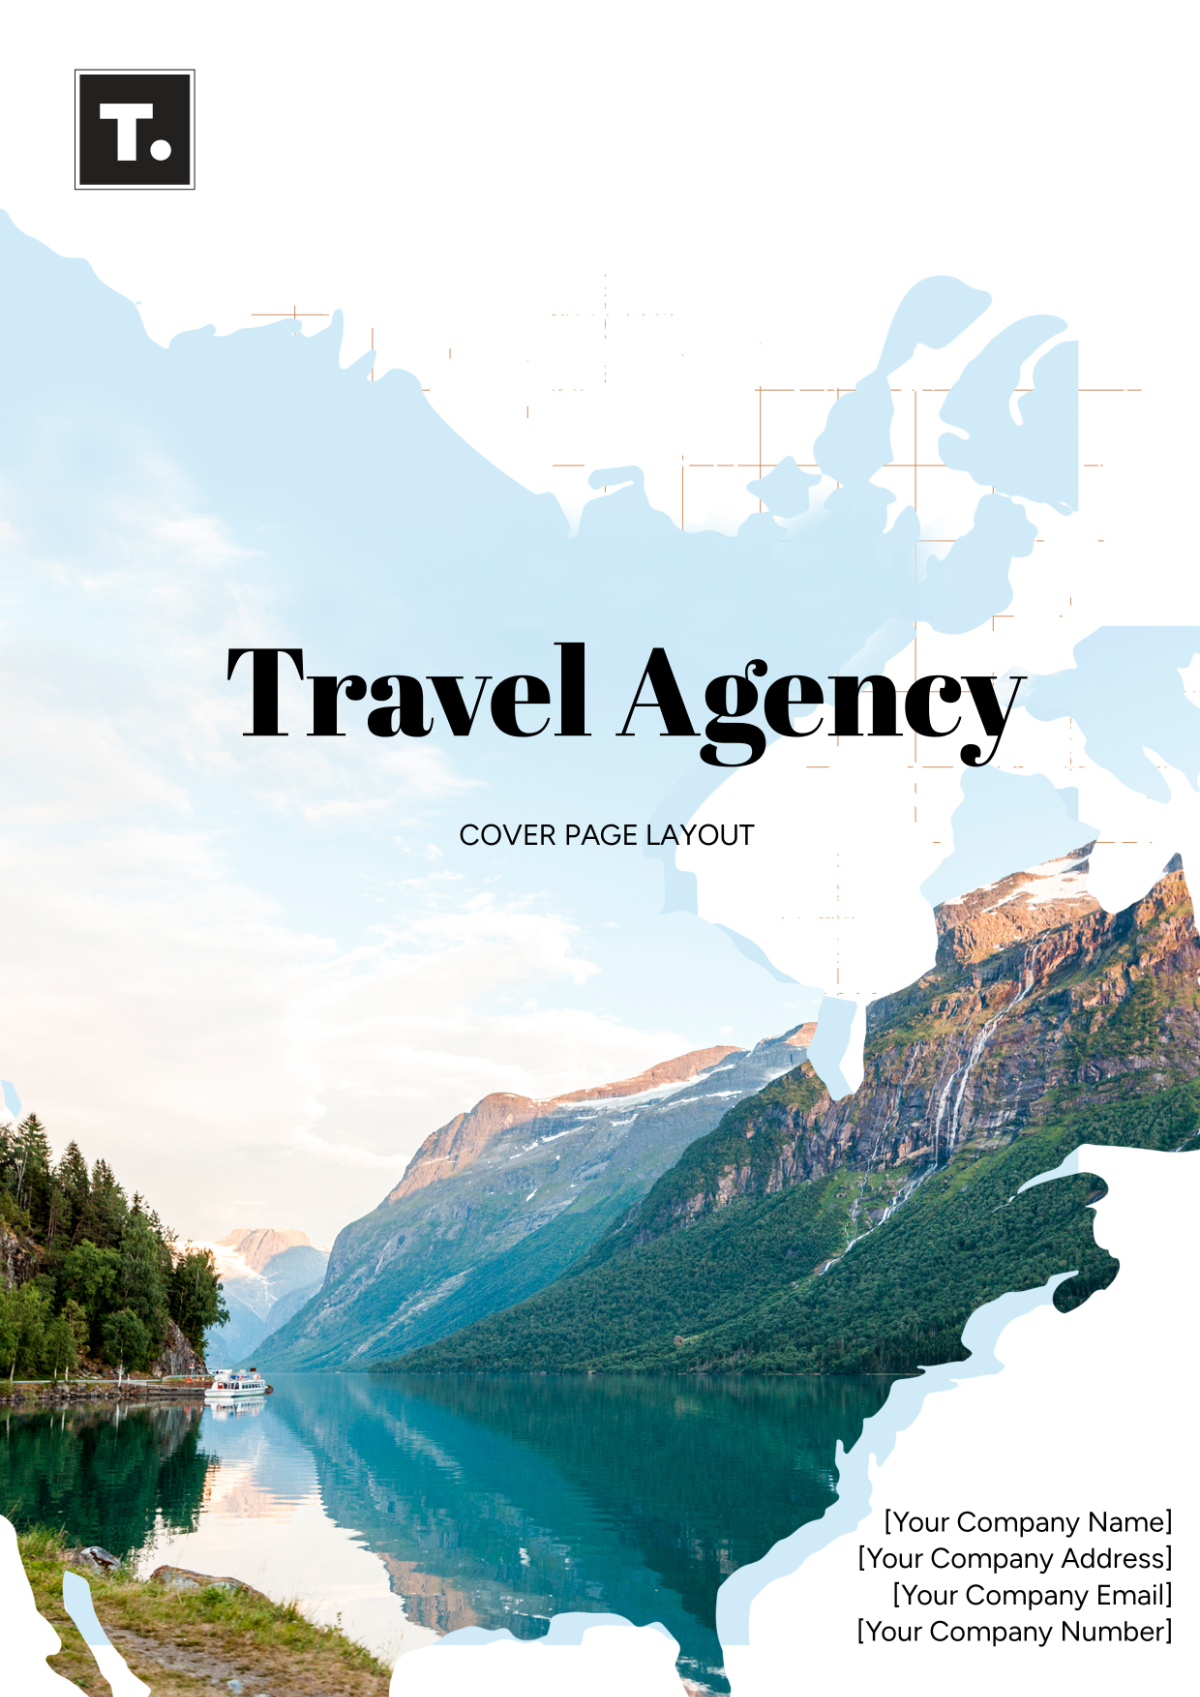 Travel Agency Cover Page Layout